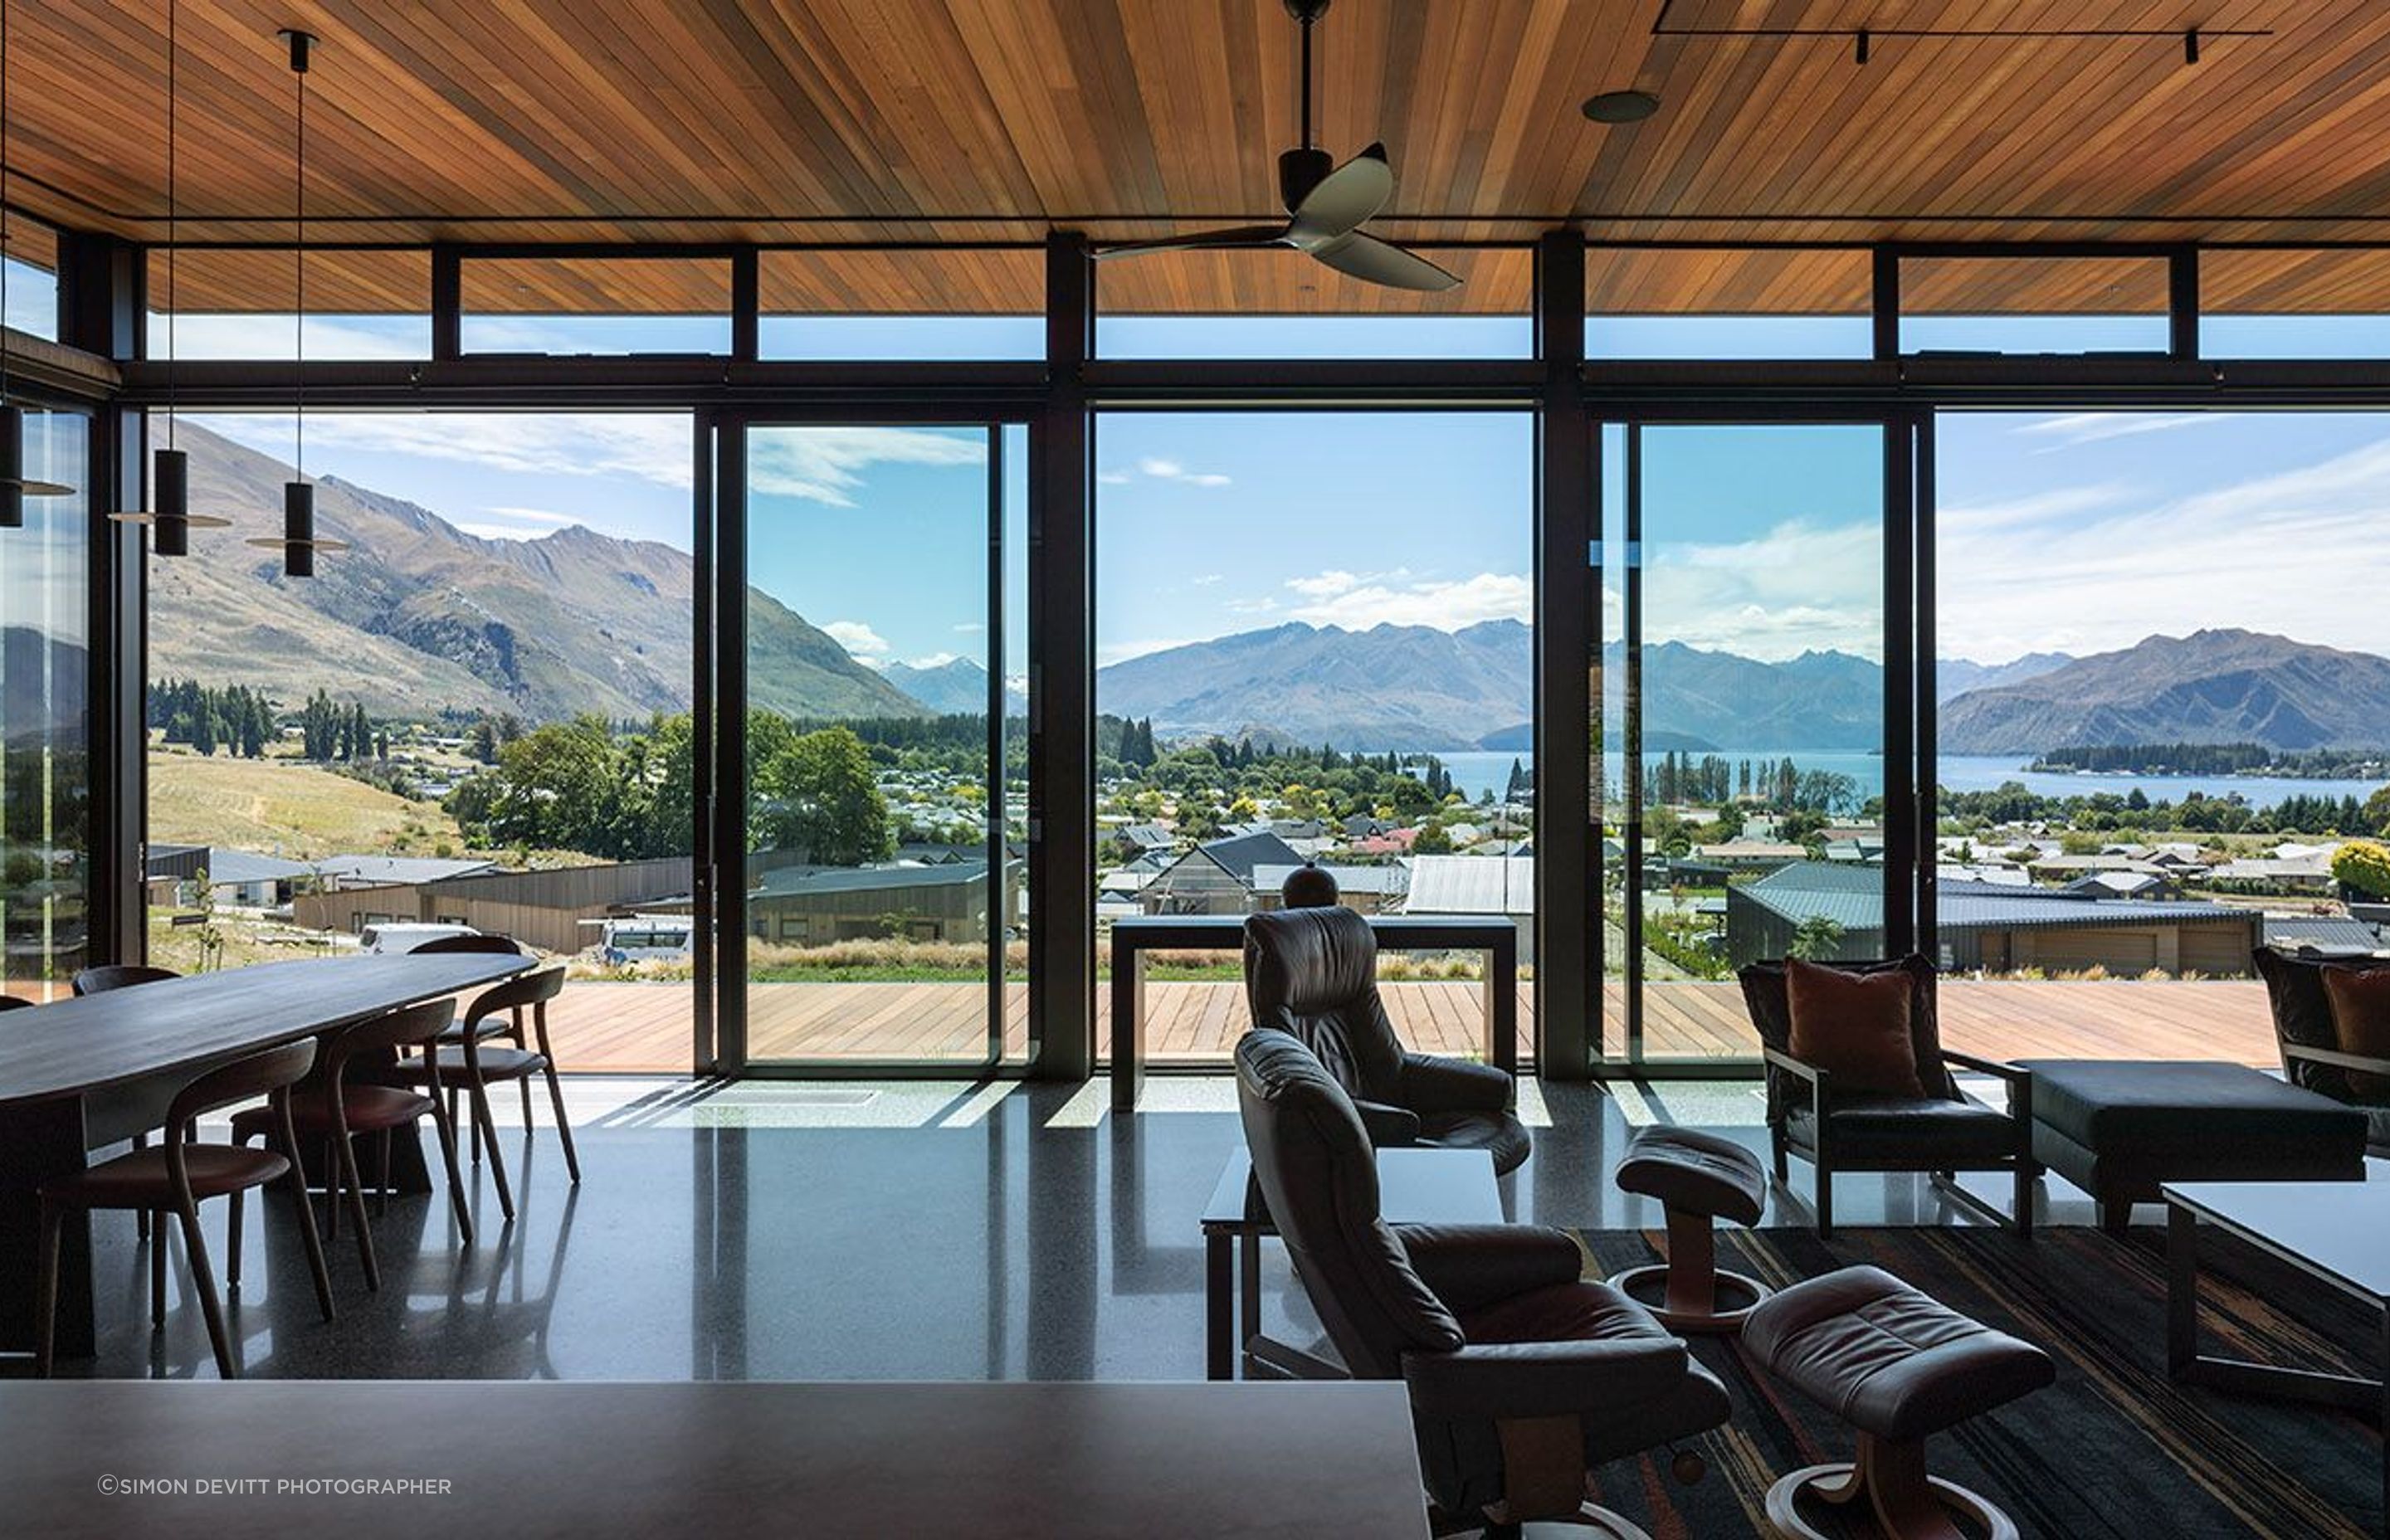 The jaw-dropping view from the living spaces takes in Lake Wanaka and the mountain ranges beyond.